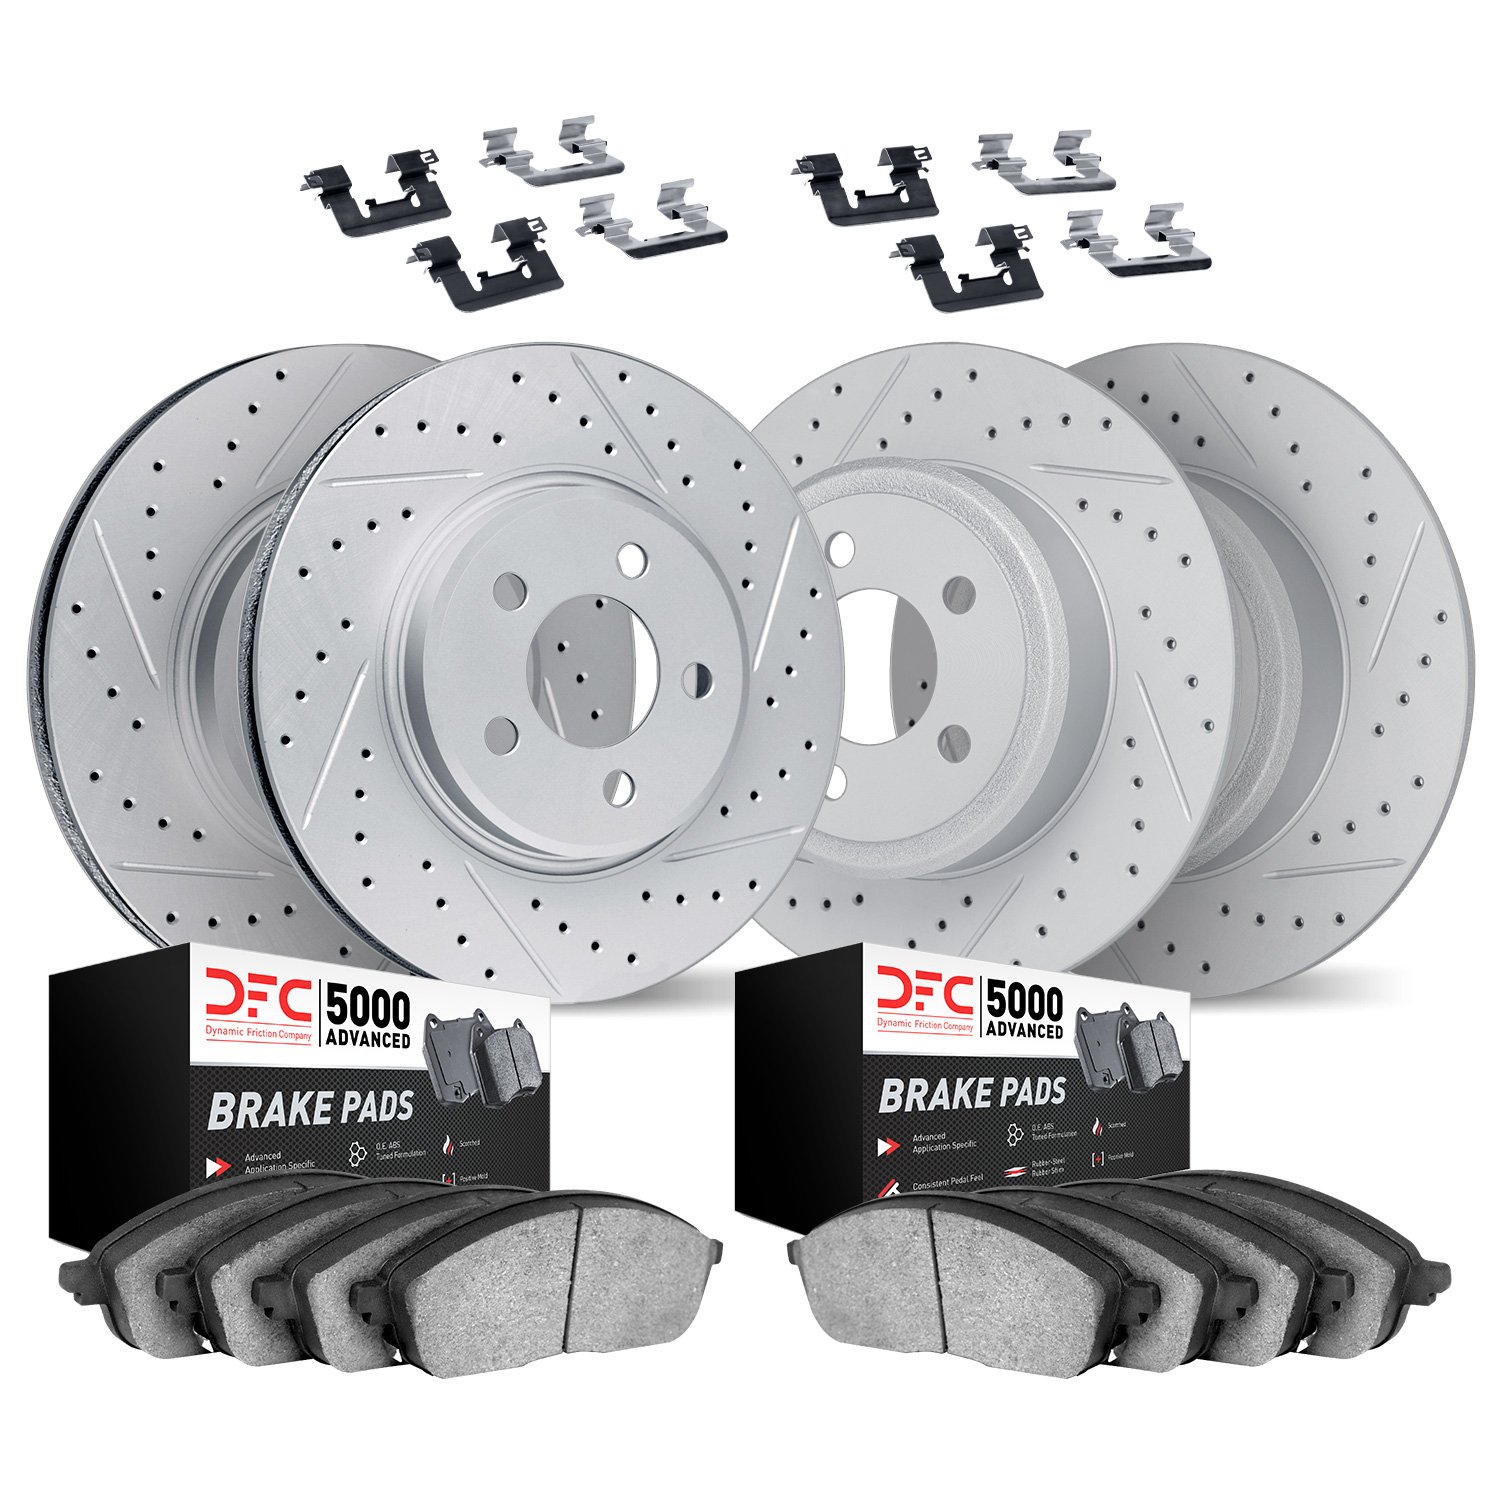 2514-27005 Geoperformance Drilled/Slotted Rotors w/5000 Advanced Brake Pads Kit & Hardware, 2012-2013 Volvo, Position: Front and